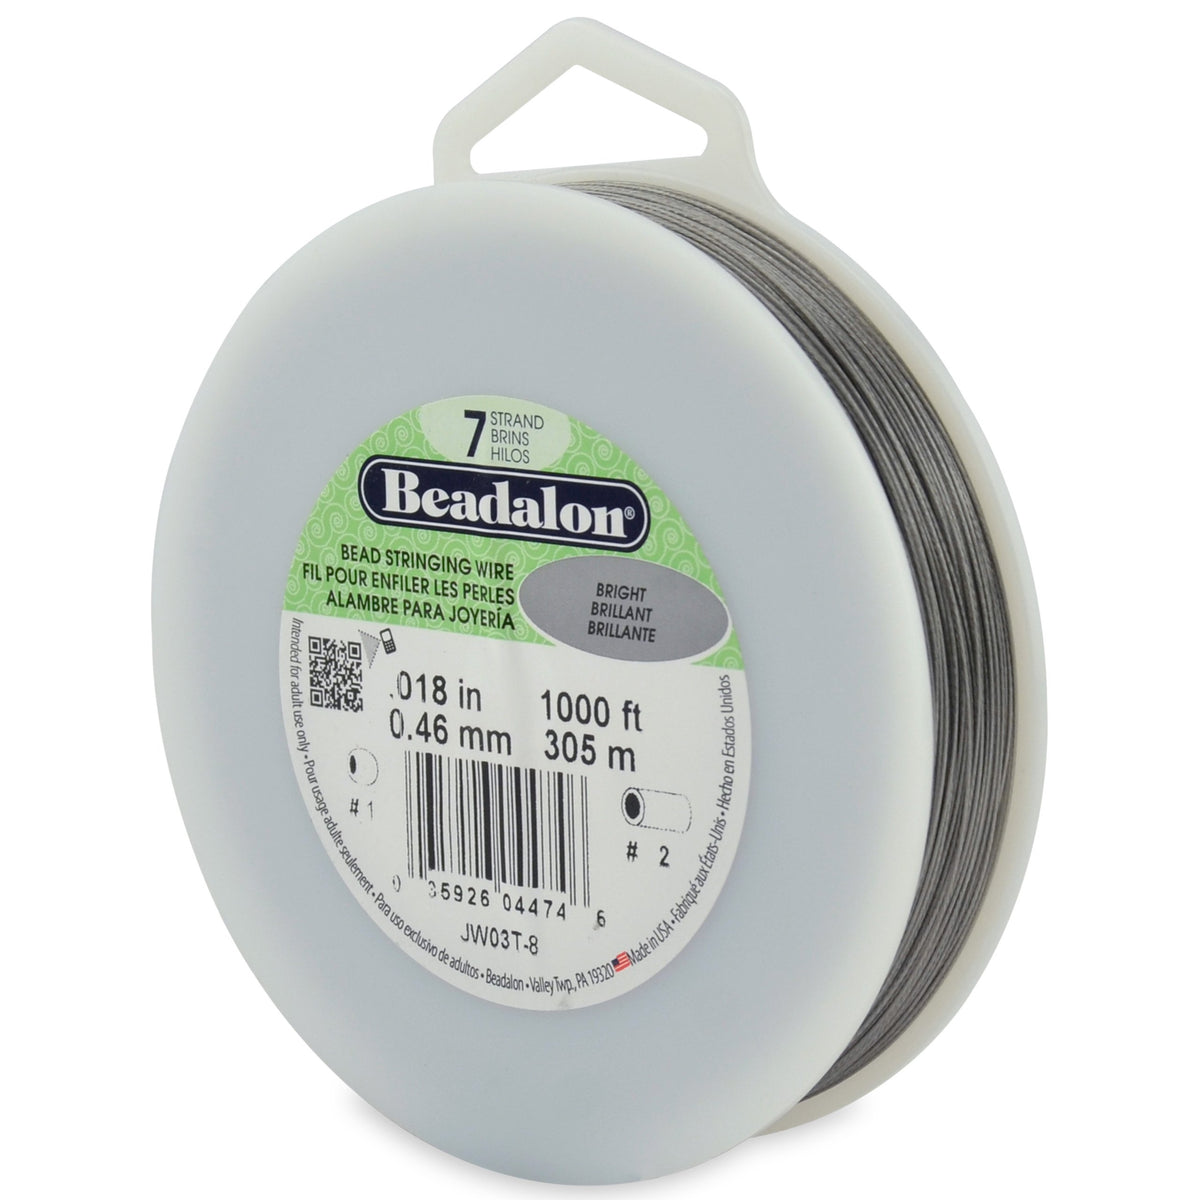 Beadalon 7 Strand Stainless Steel Bead Stringing Wire, 018 in / 0.46 mm, Bright, 1000 ft / 305 m